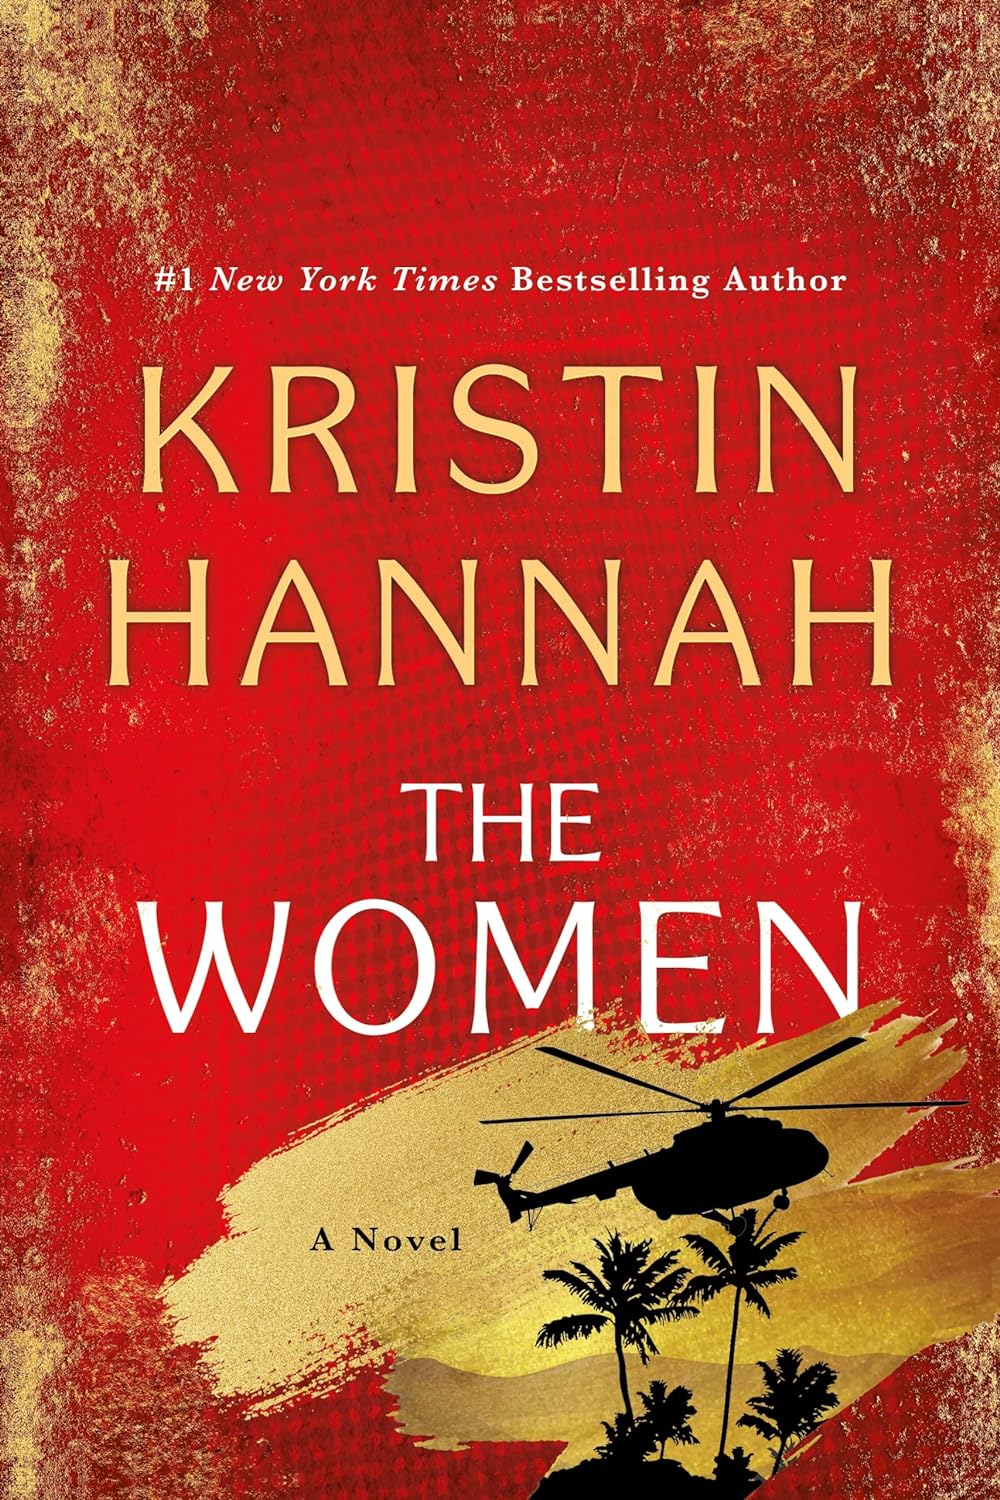 One of our recommended books is The Women by Kristin Hannah